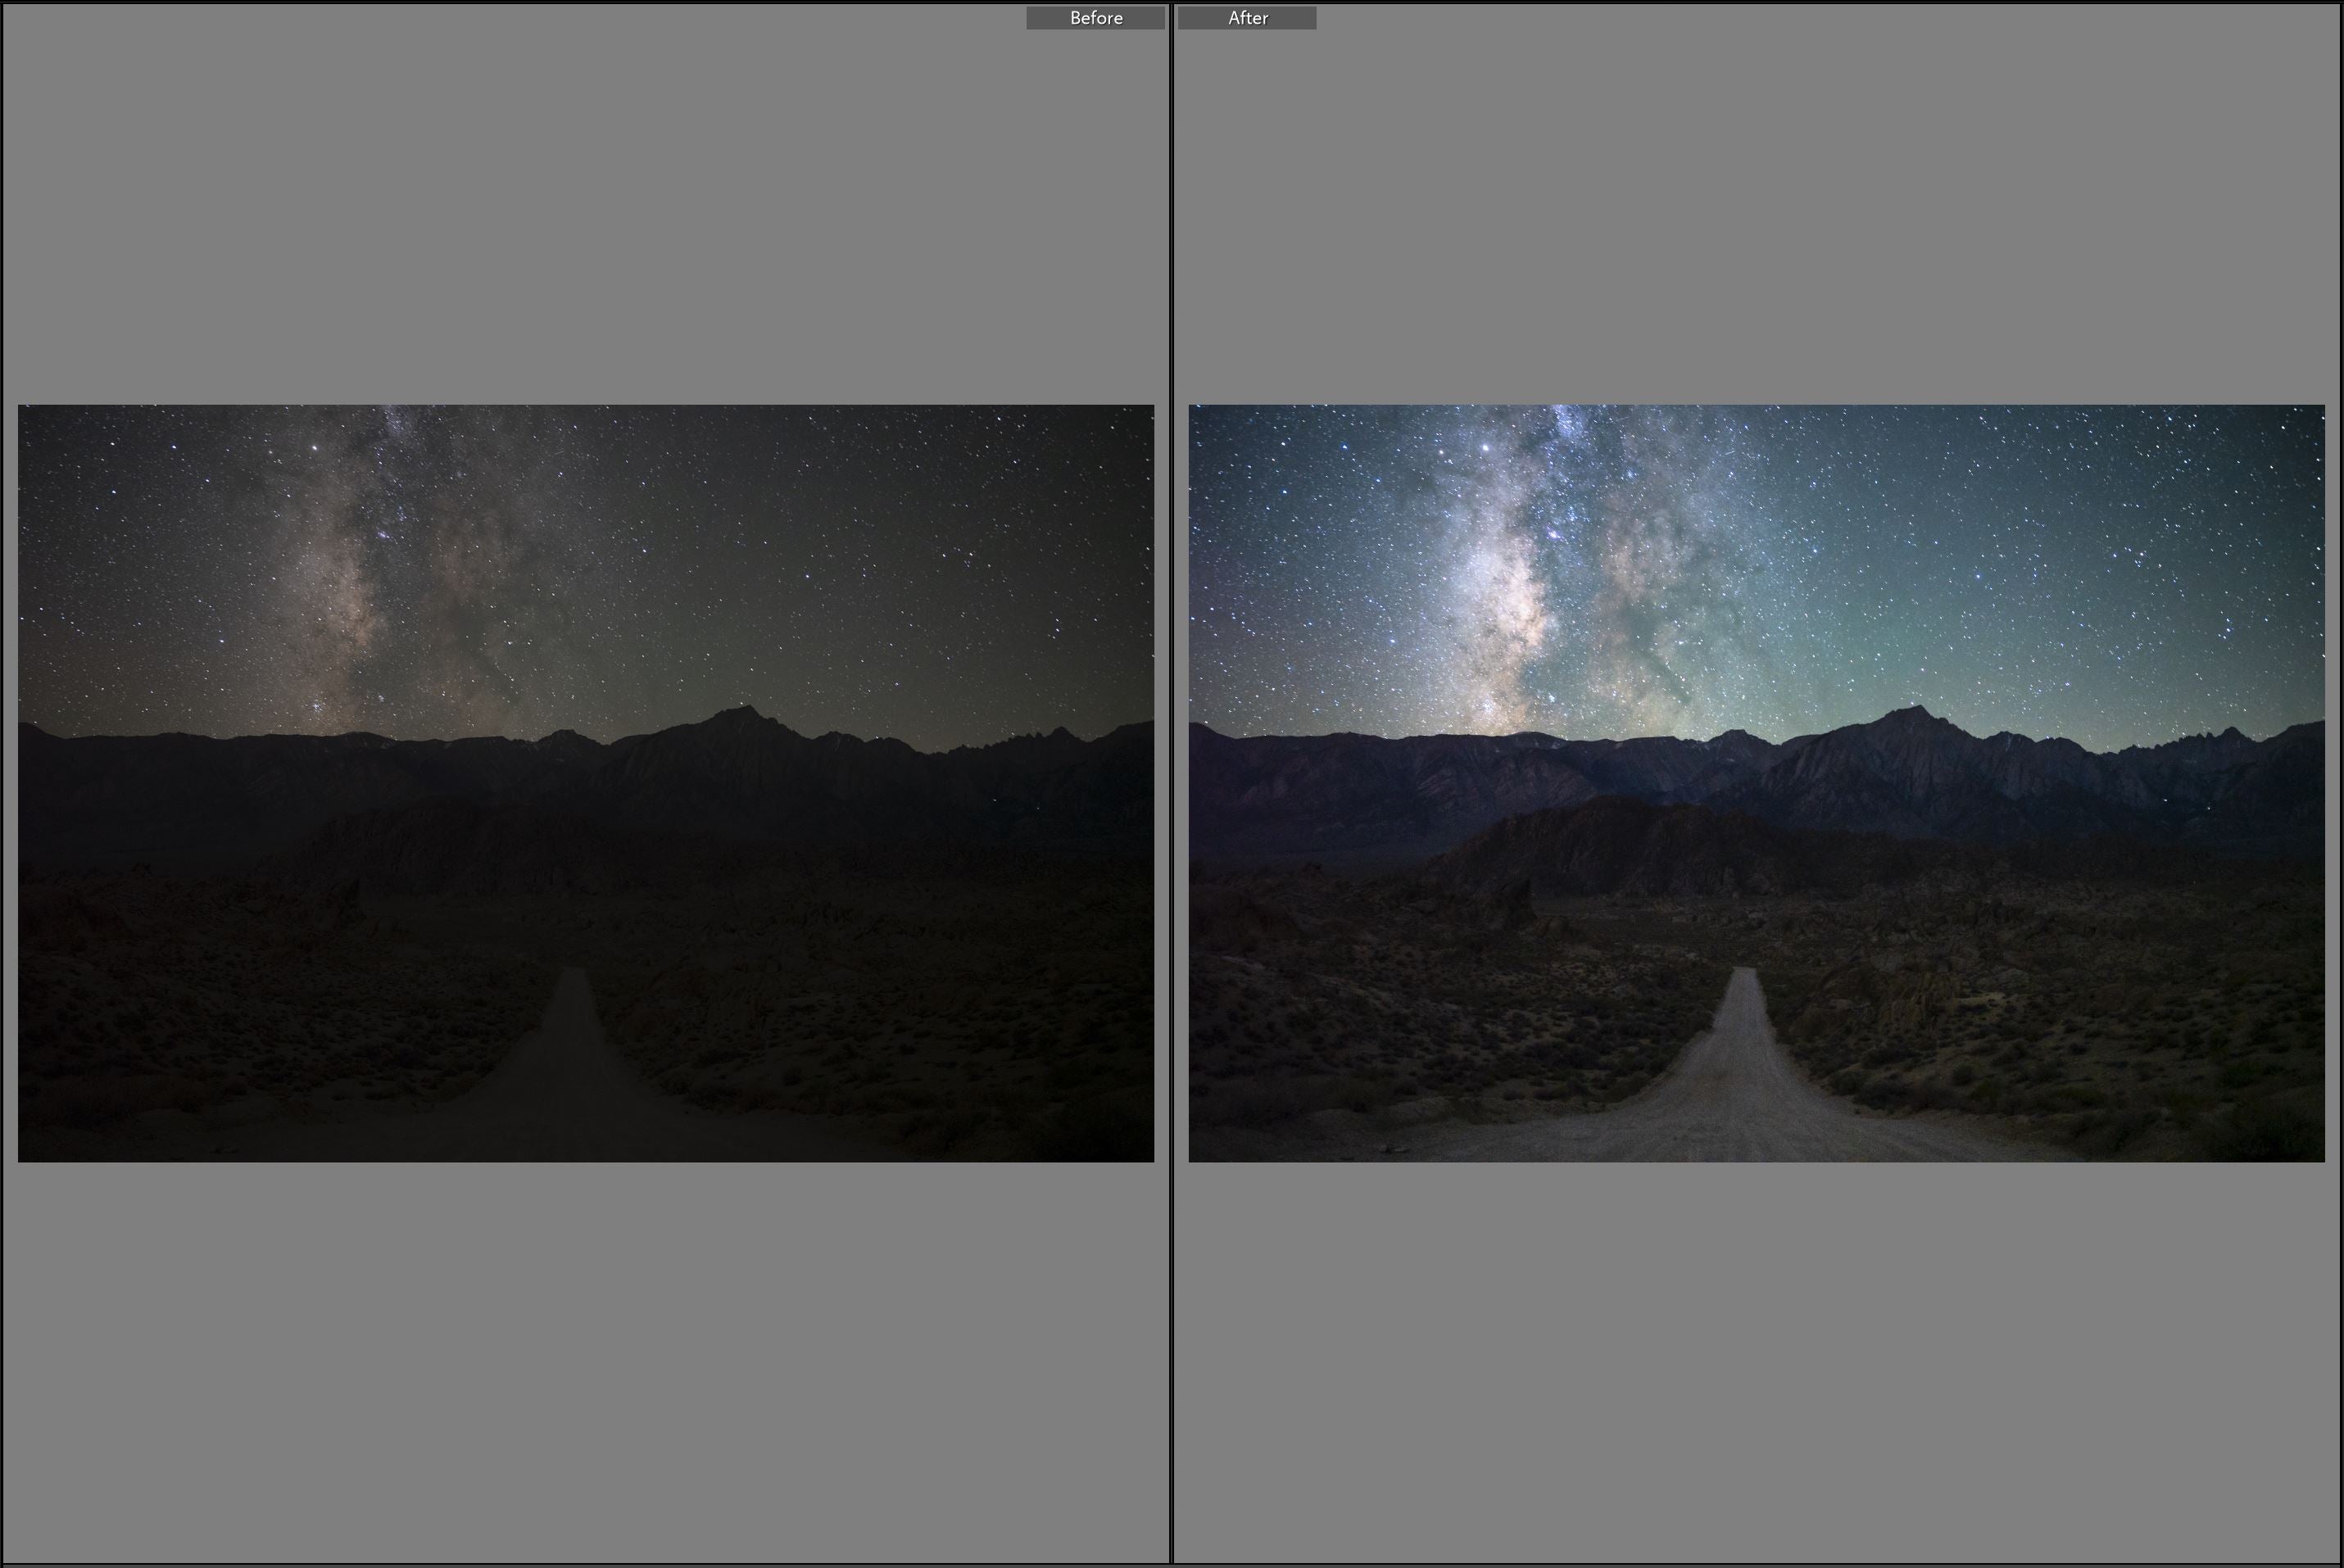 Galactic View - Astrophotography Presets for Lightroom